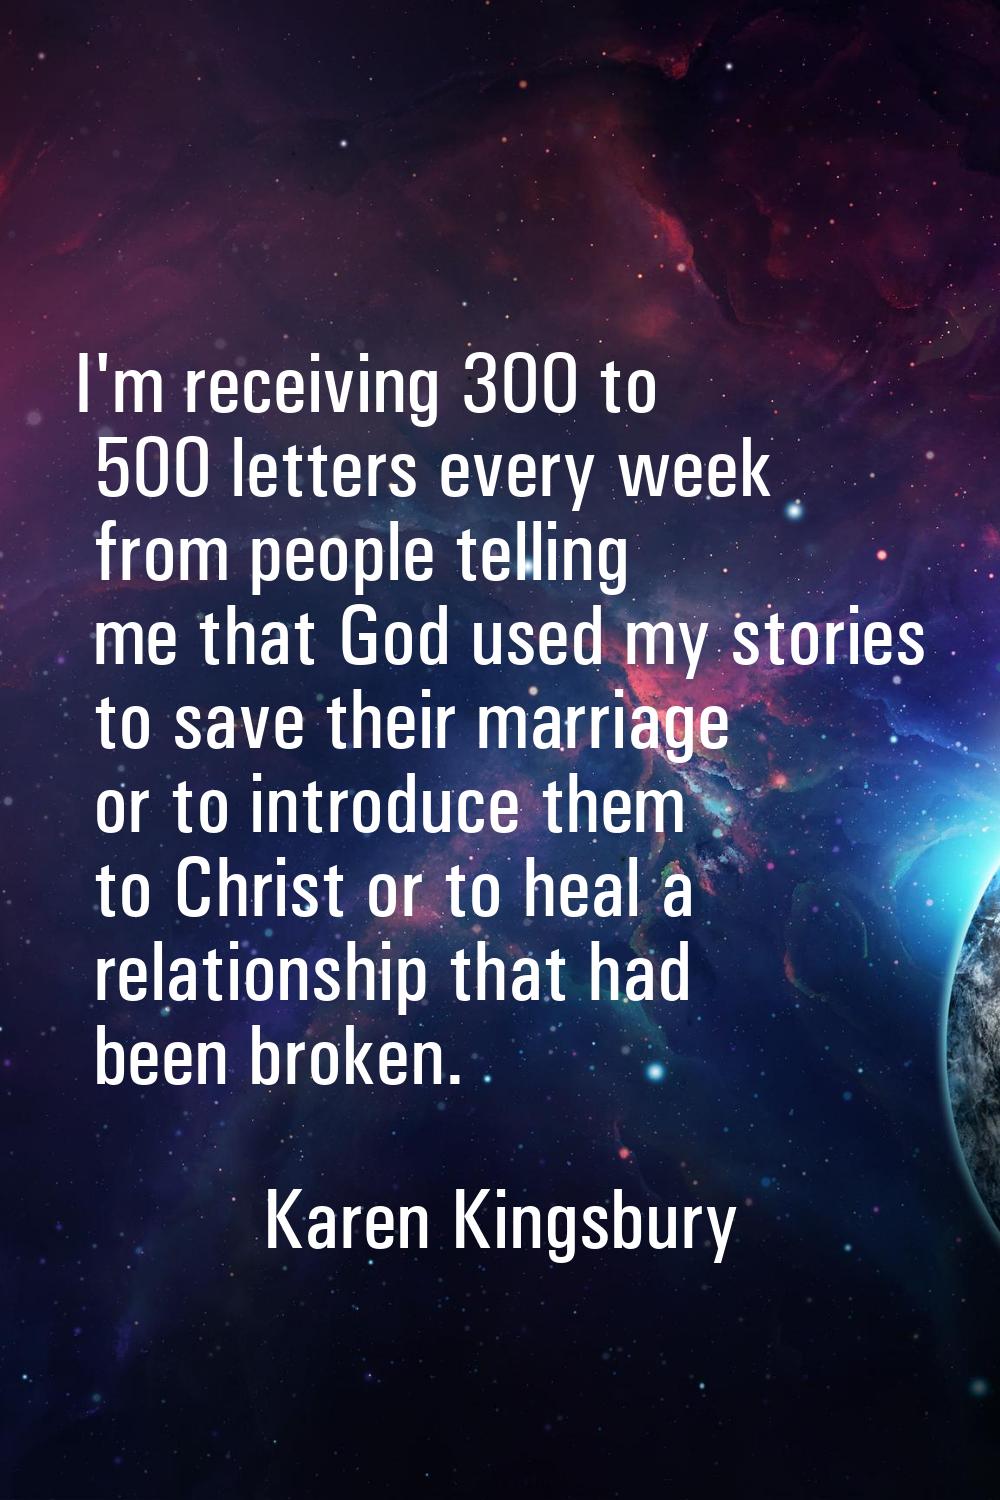 I'm receiving 300 to 500 letters every week from people telling me that God used my stories to save